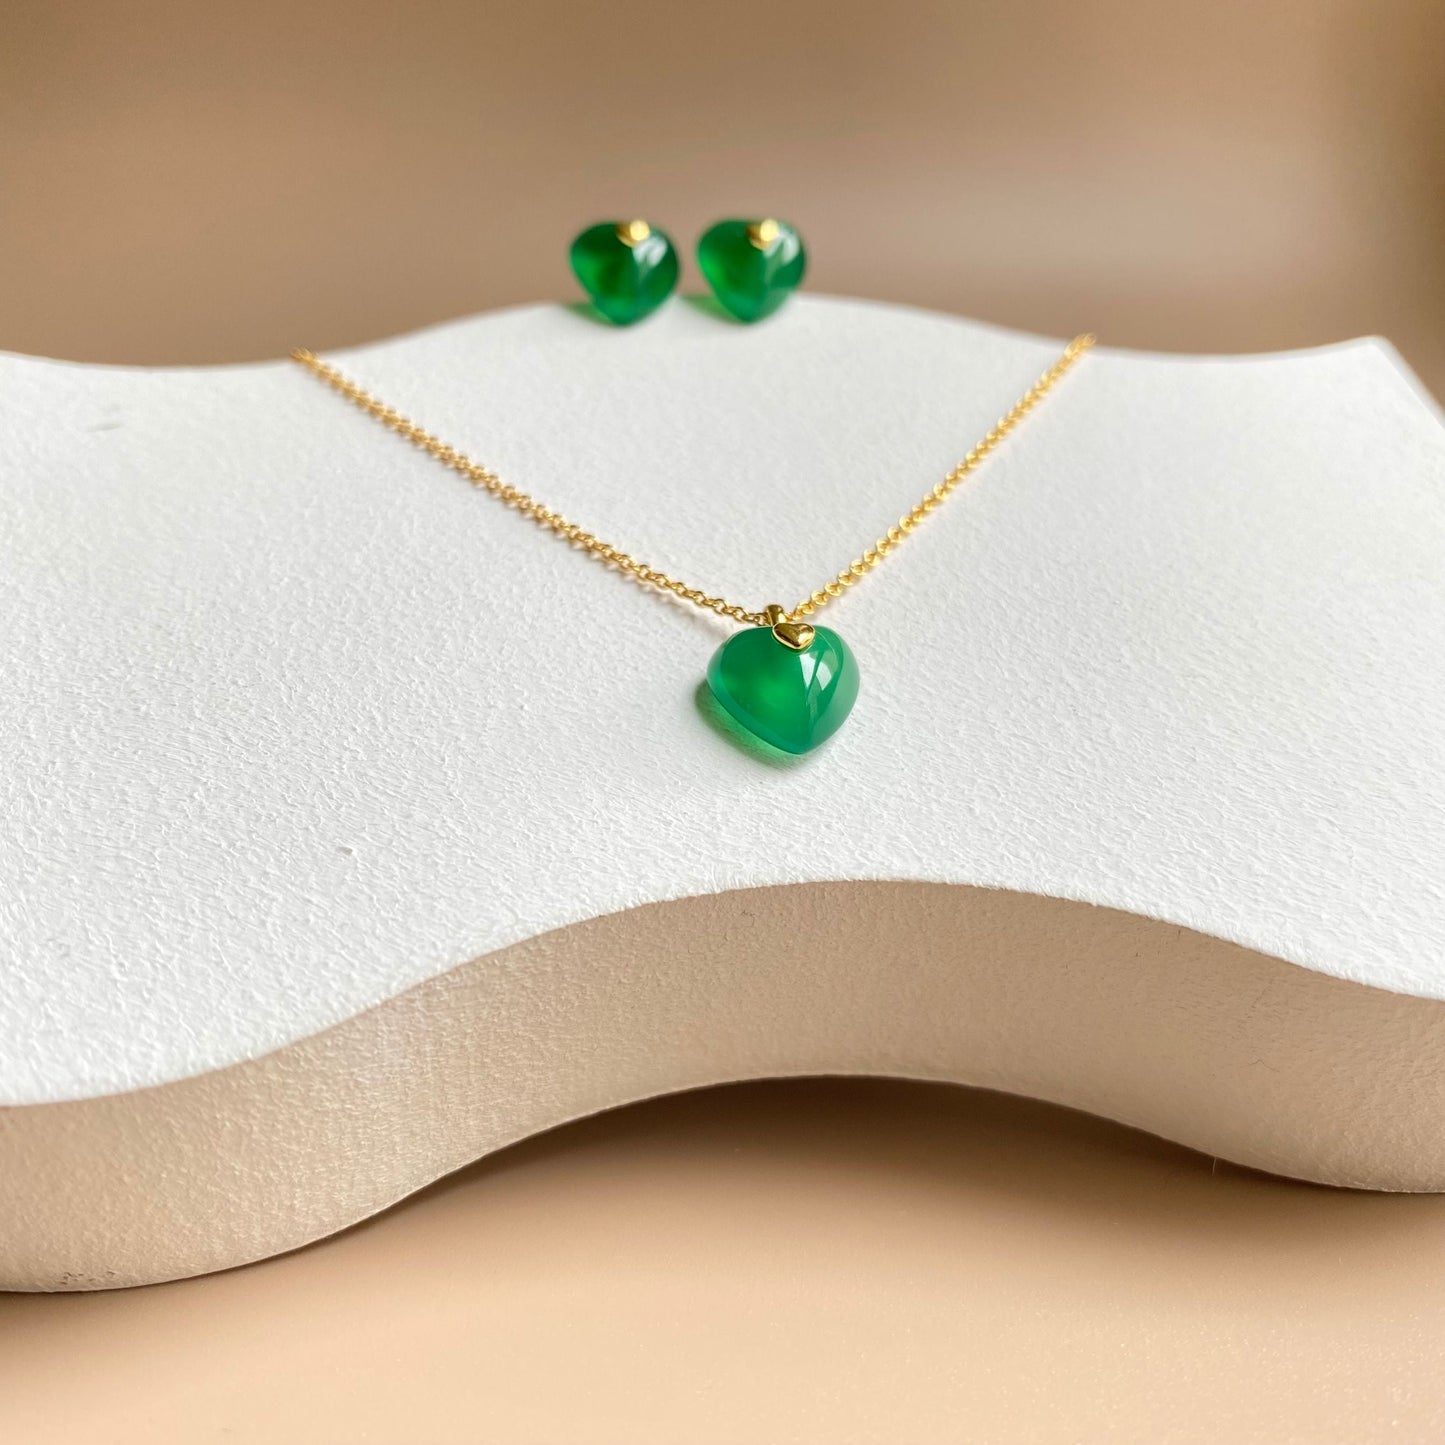 Green chalcedony Love Necklace necklaces from SHOPQAQ